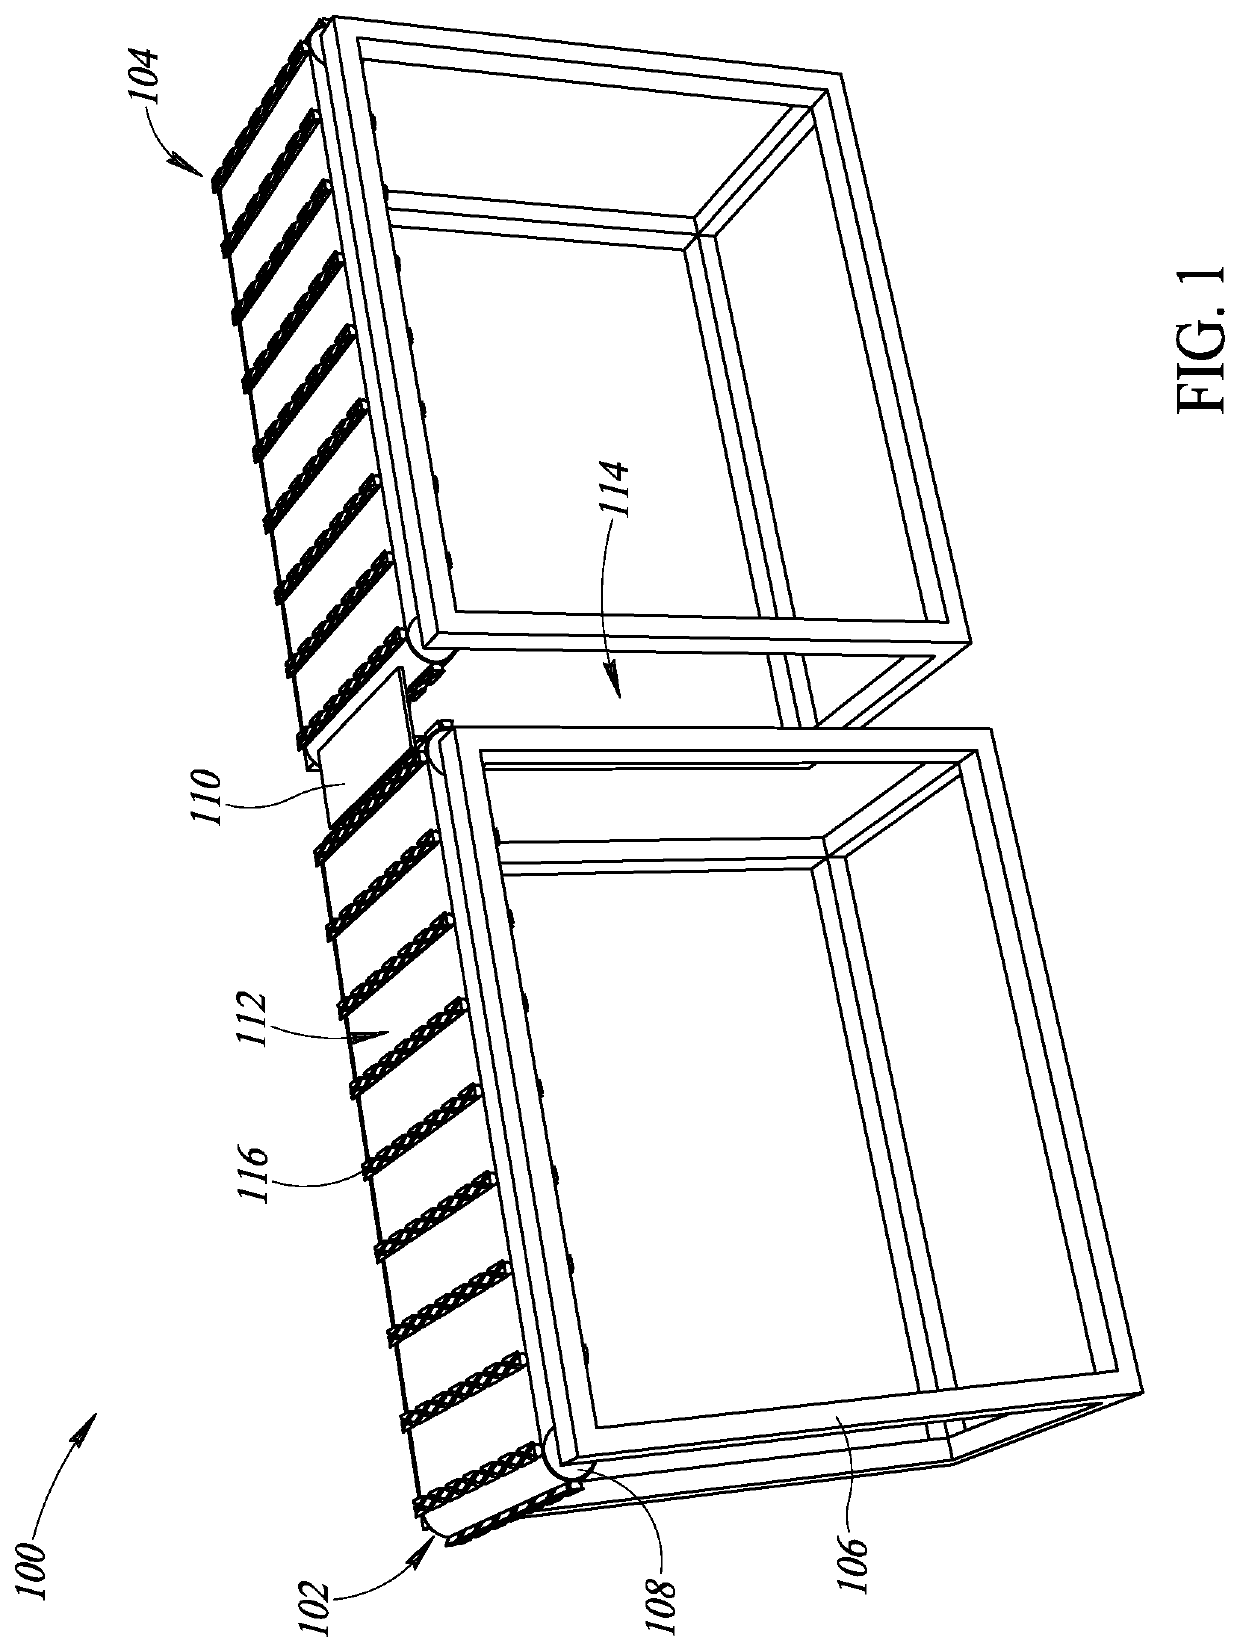 Multi-view imaging system and methods for non-invasive inspection in food processing